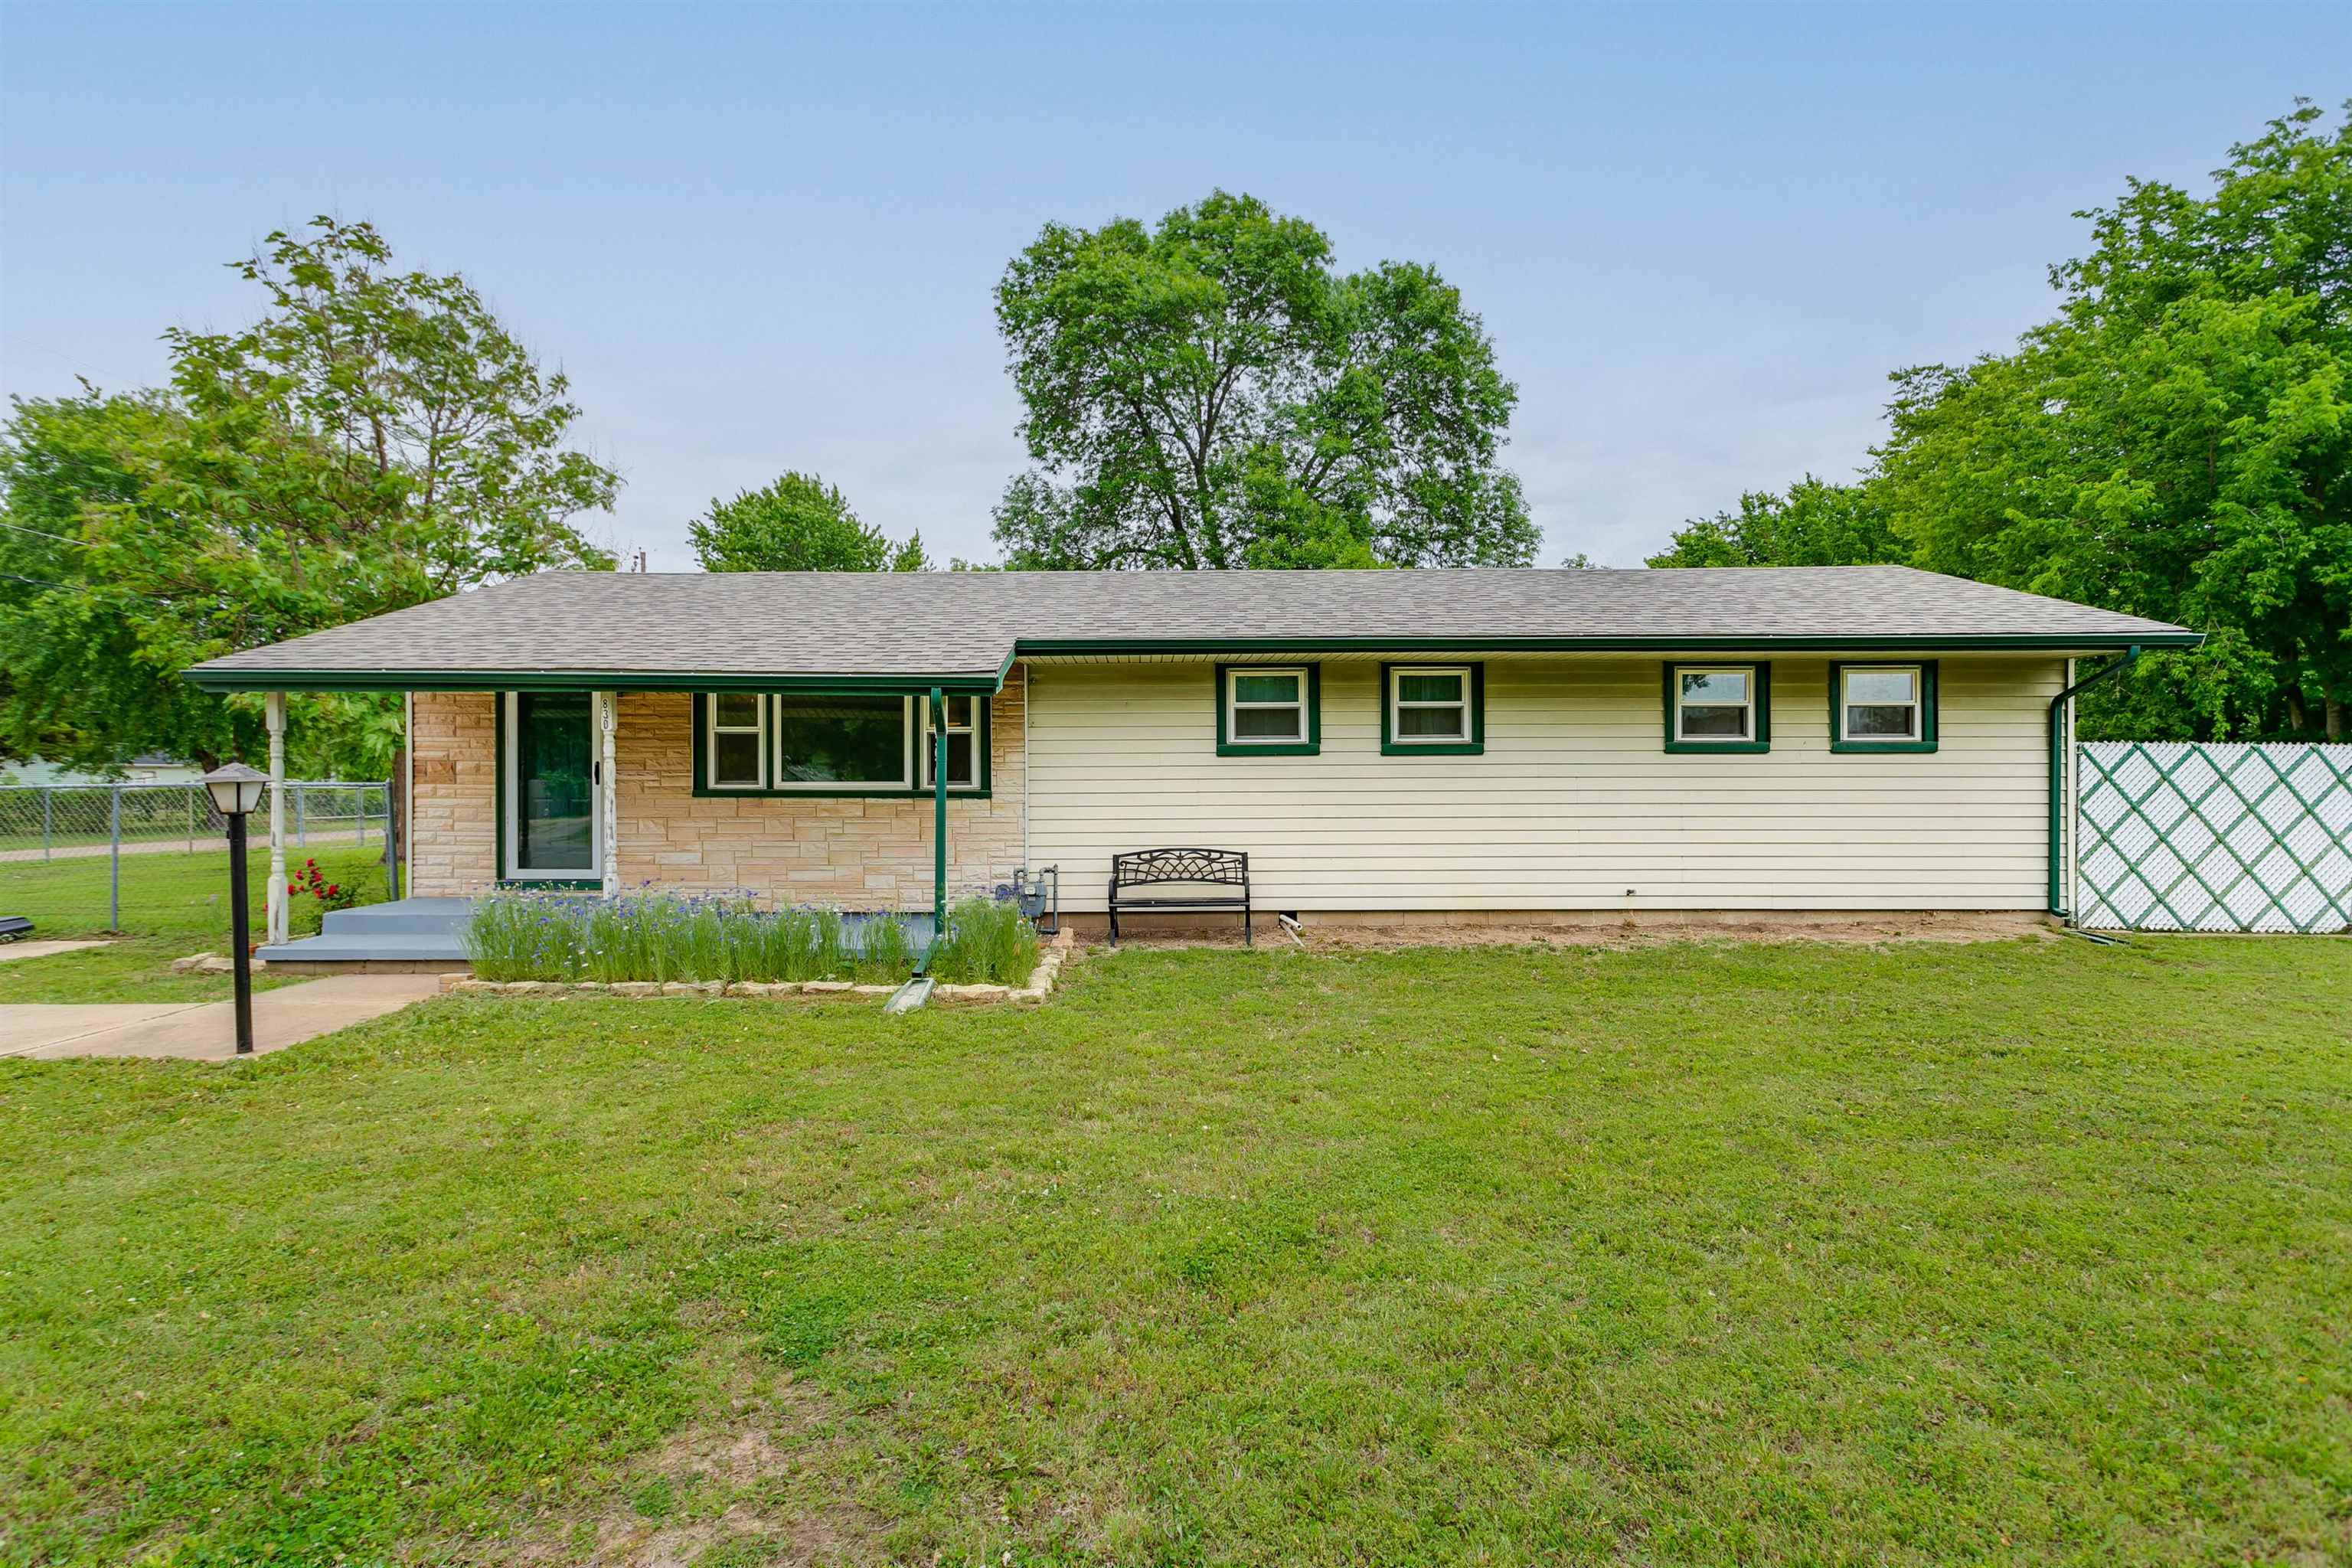 NEED TO HURRY!  ADORABLE FULL REMODEL with charm and character, in quiet SW Wichita neighborhood tha